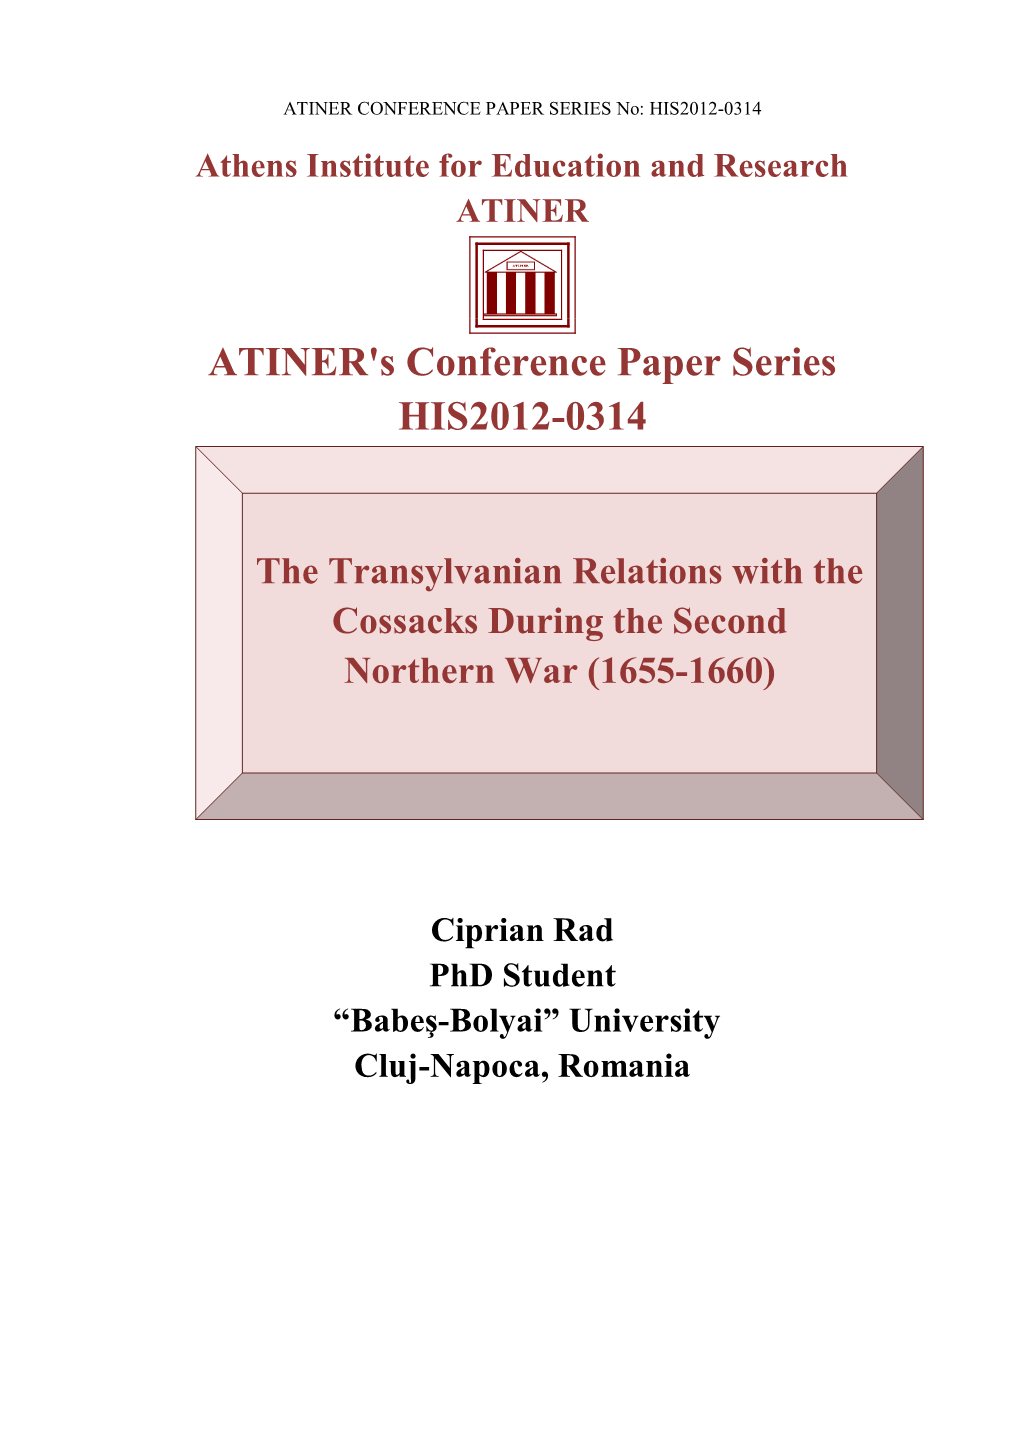 ATINER's Conference Paper Series HIS2012-0314